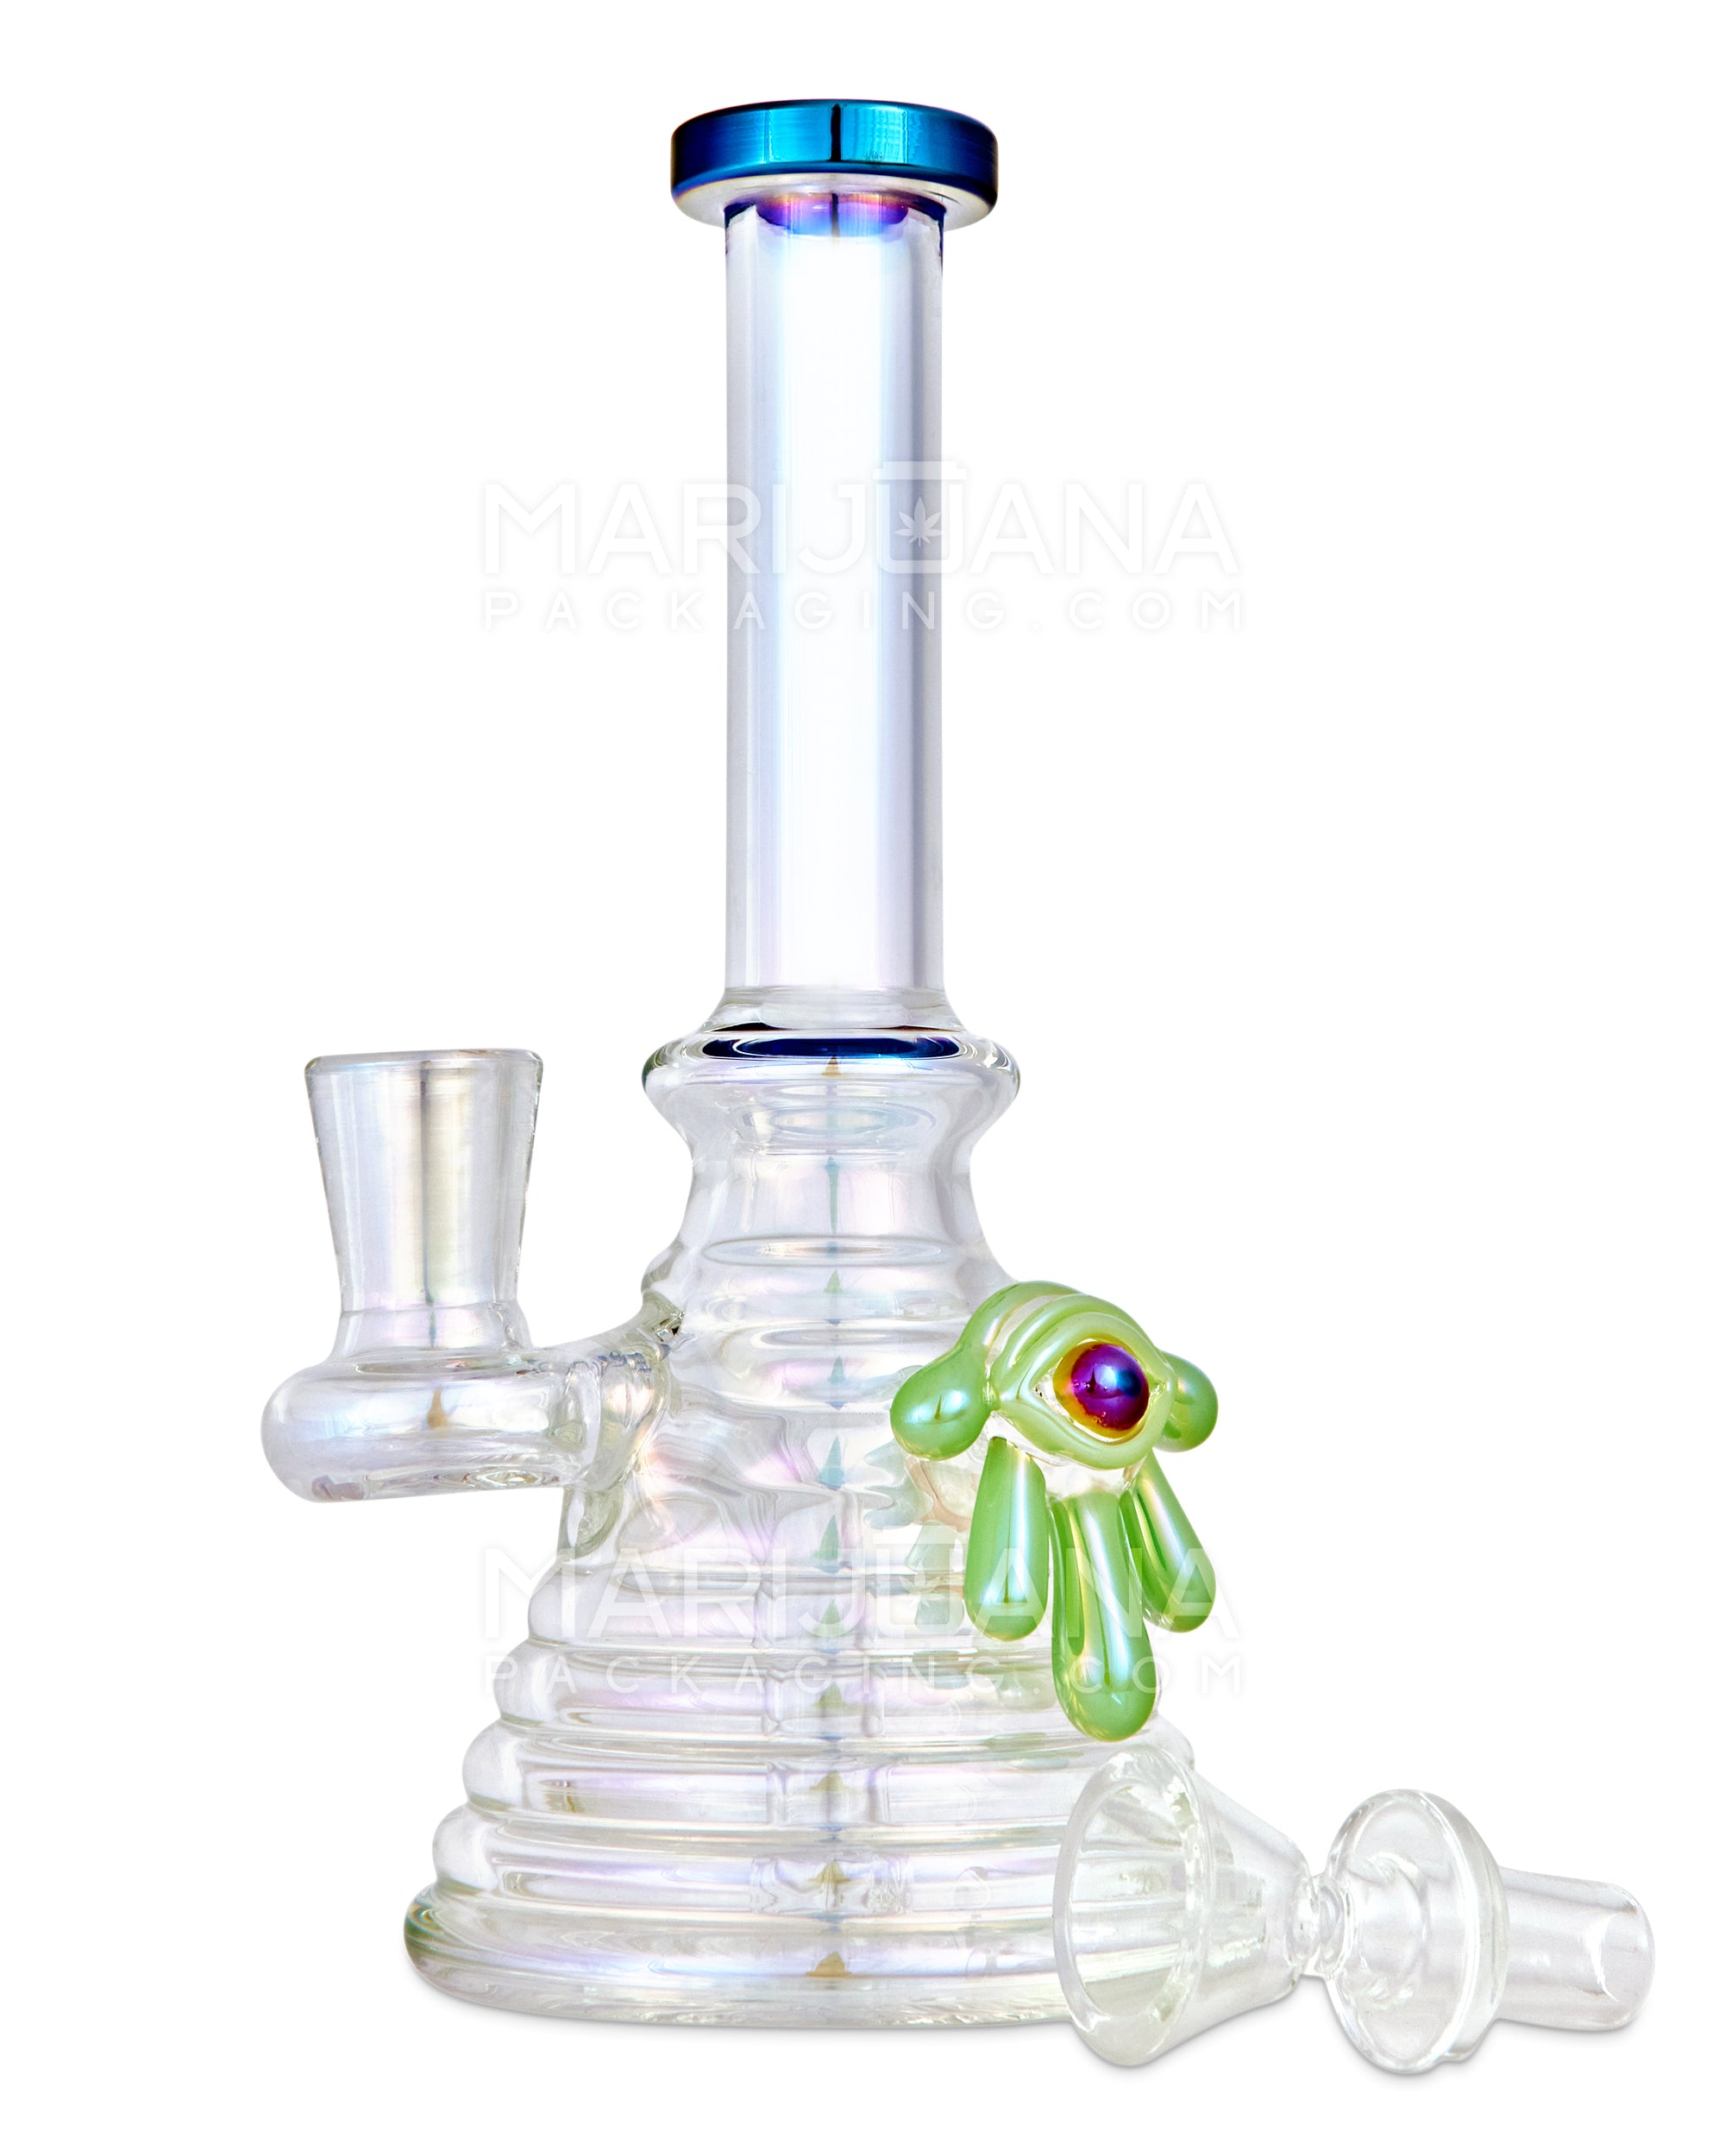 Straight Neck Diffused Perc Glass Ribbed Beaker Water Pipe w/ Green Evil Eye | 7.5in Tall - 14mm Bowl - Iridescent - 2